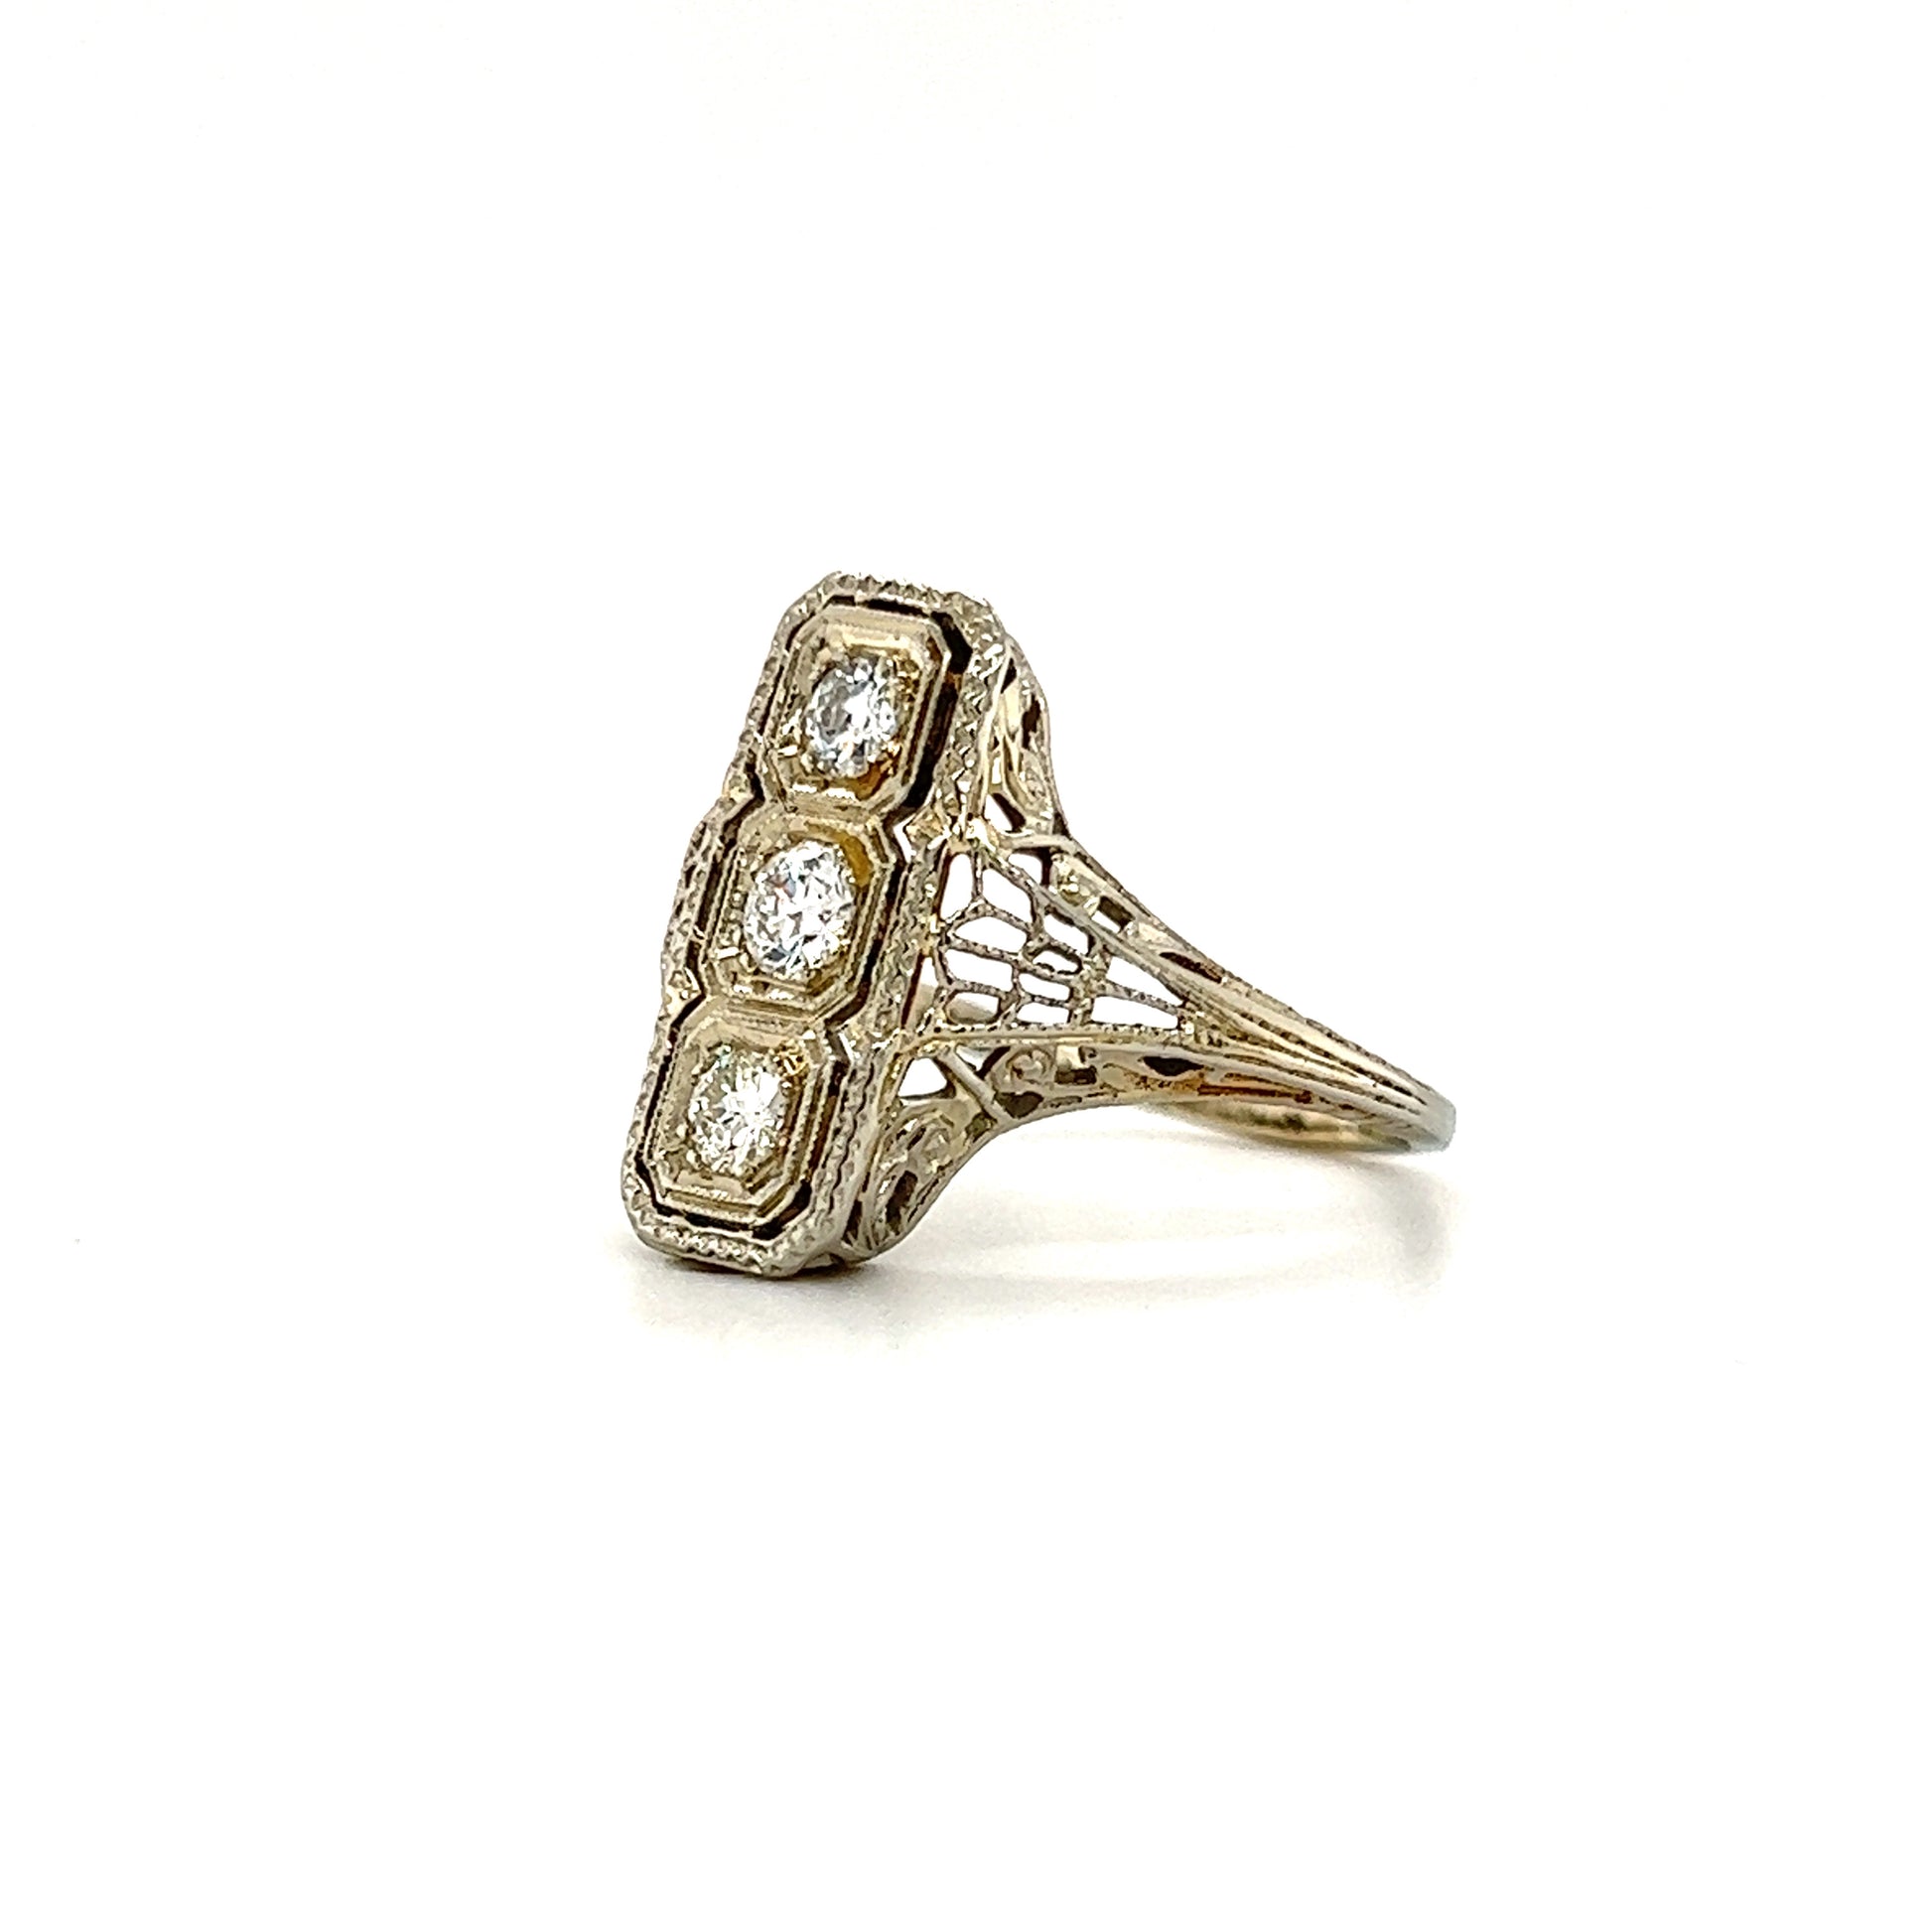 Rectangular Diamond Ring with Filigree and Milgrain in 18K White Gold Right Side View